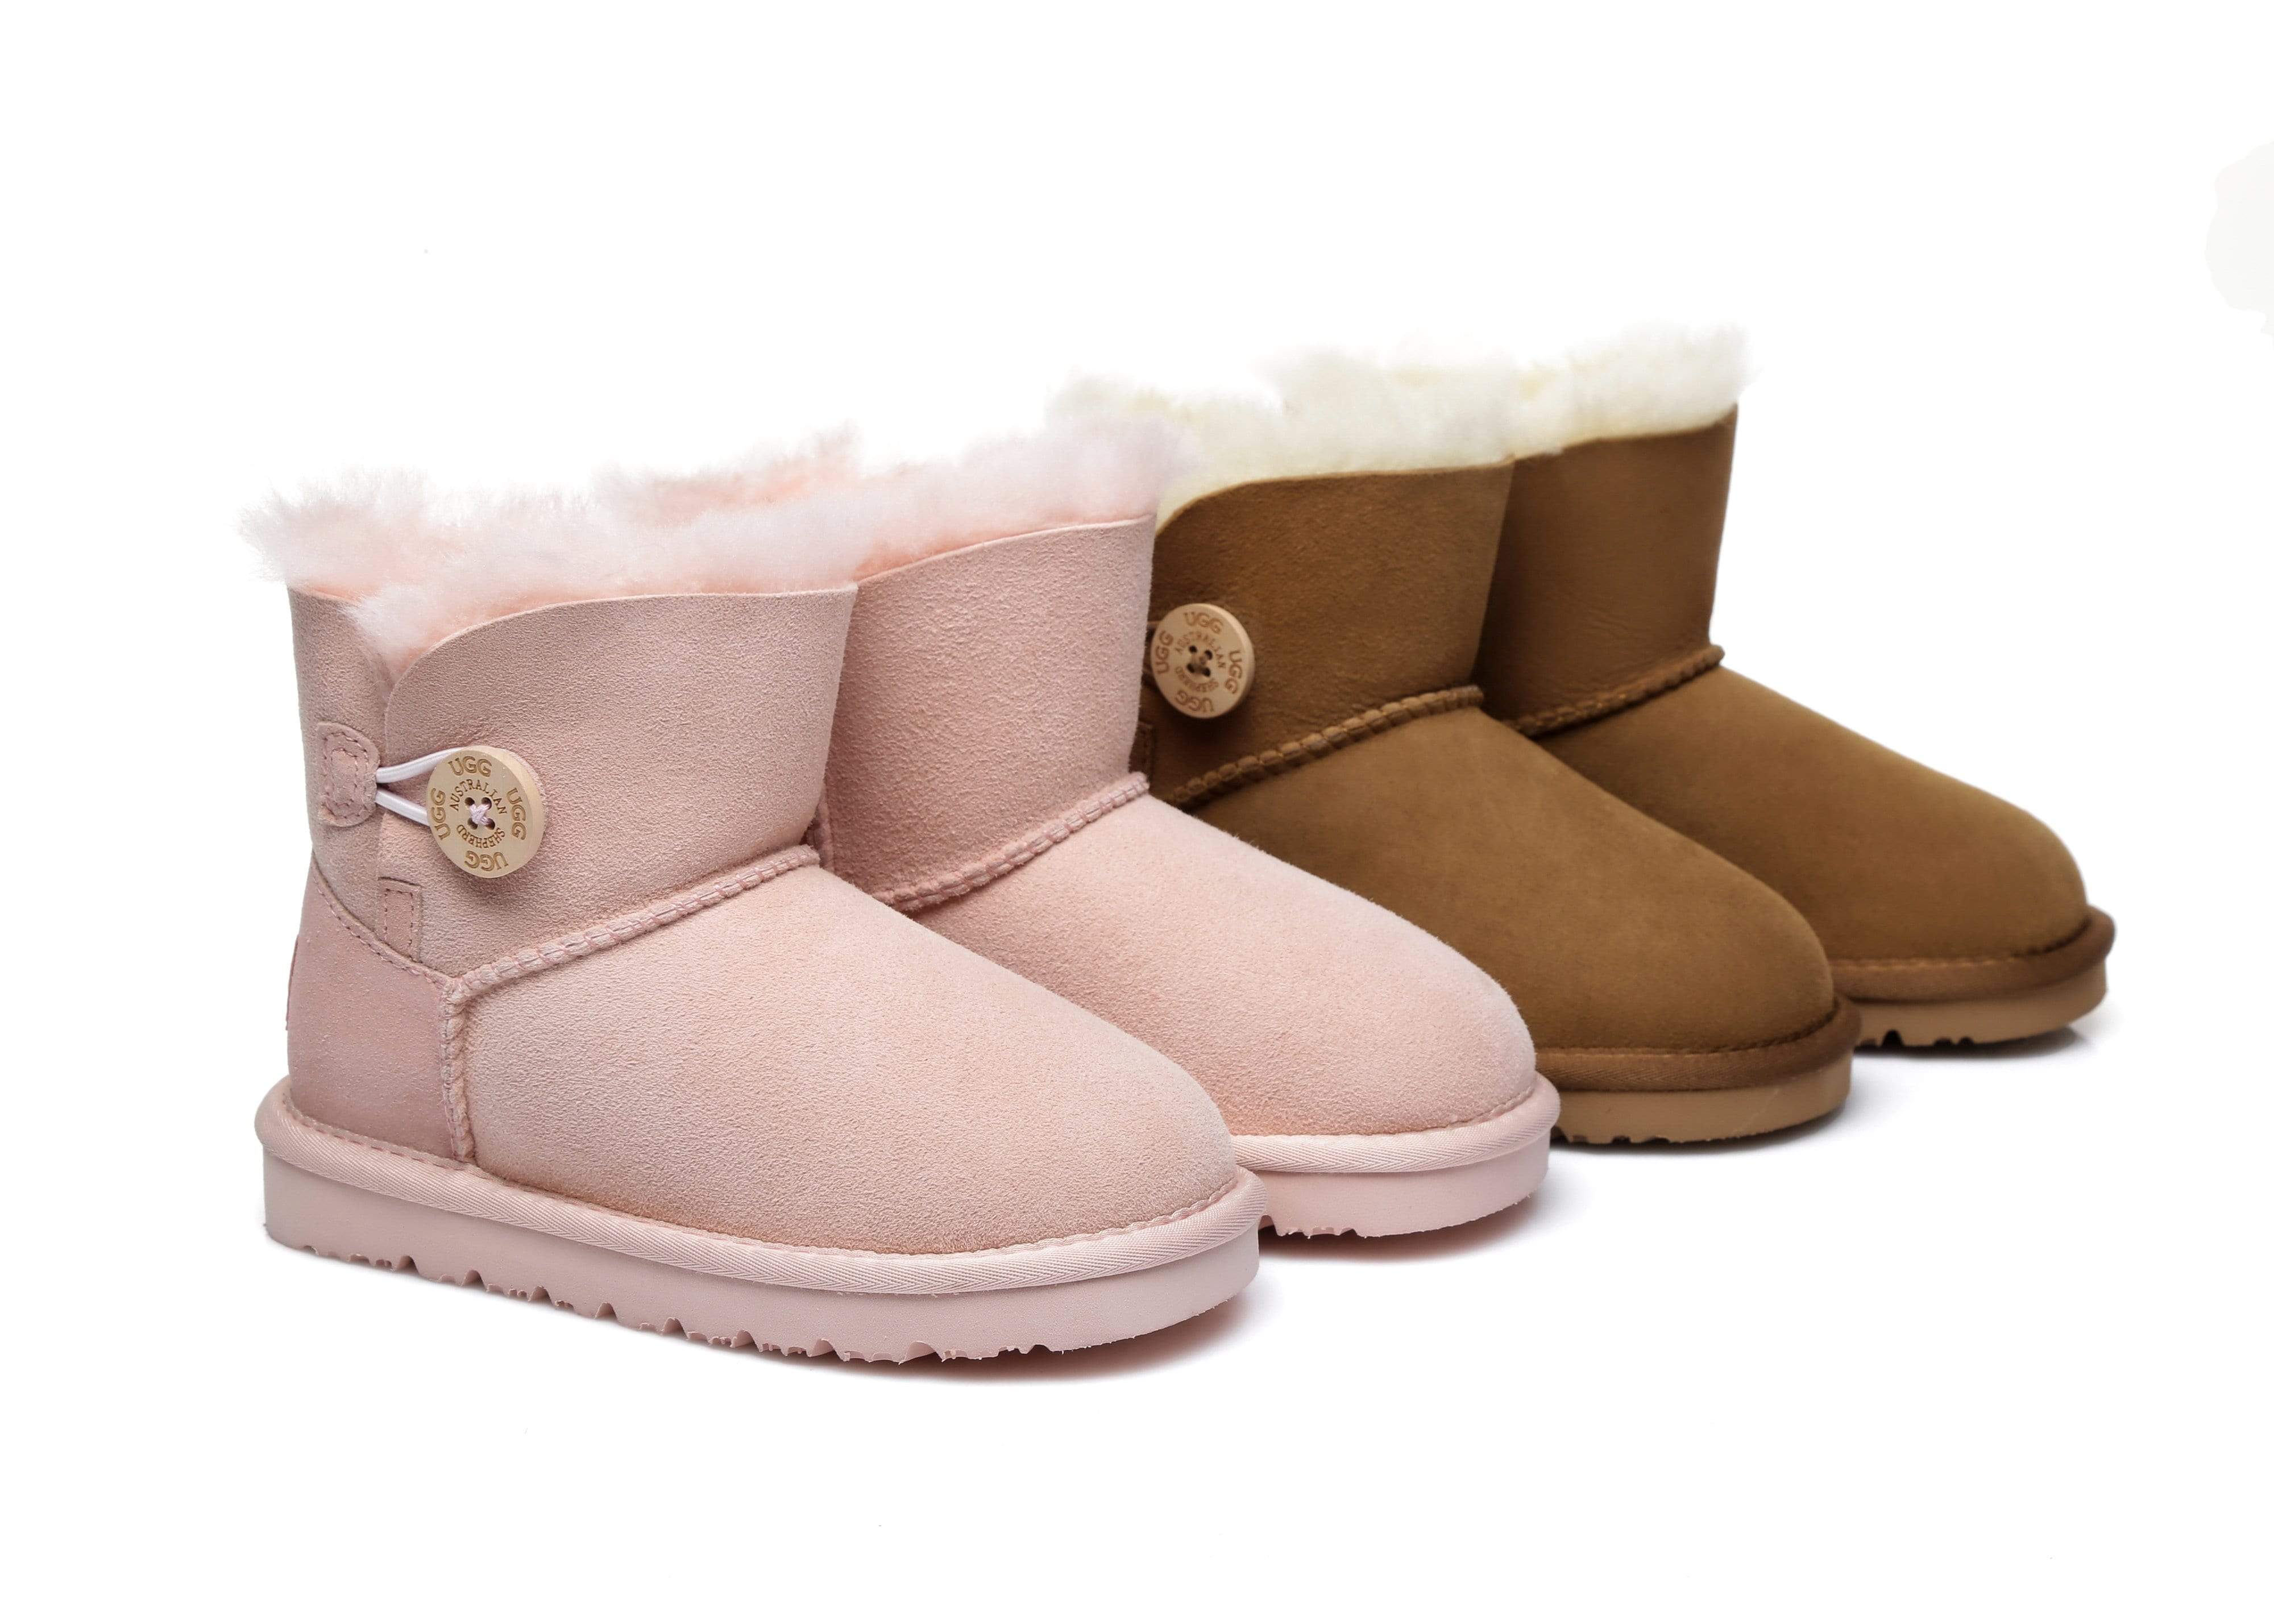 Kids Mini Button Ugg Boots - The UGG Boots